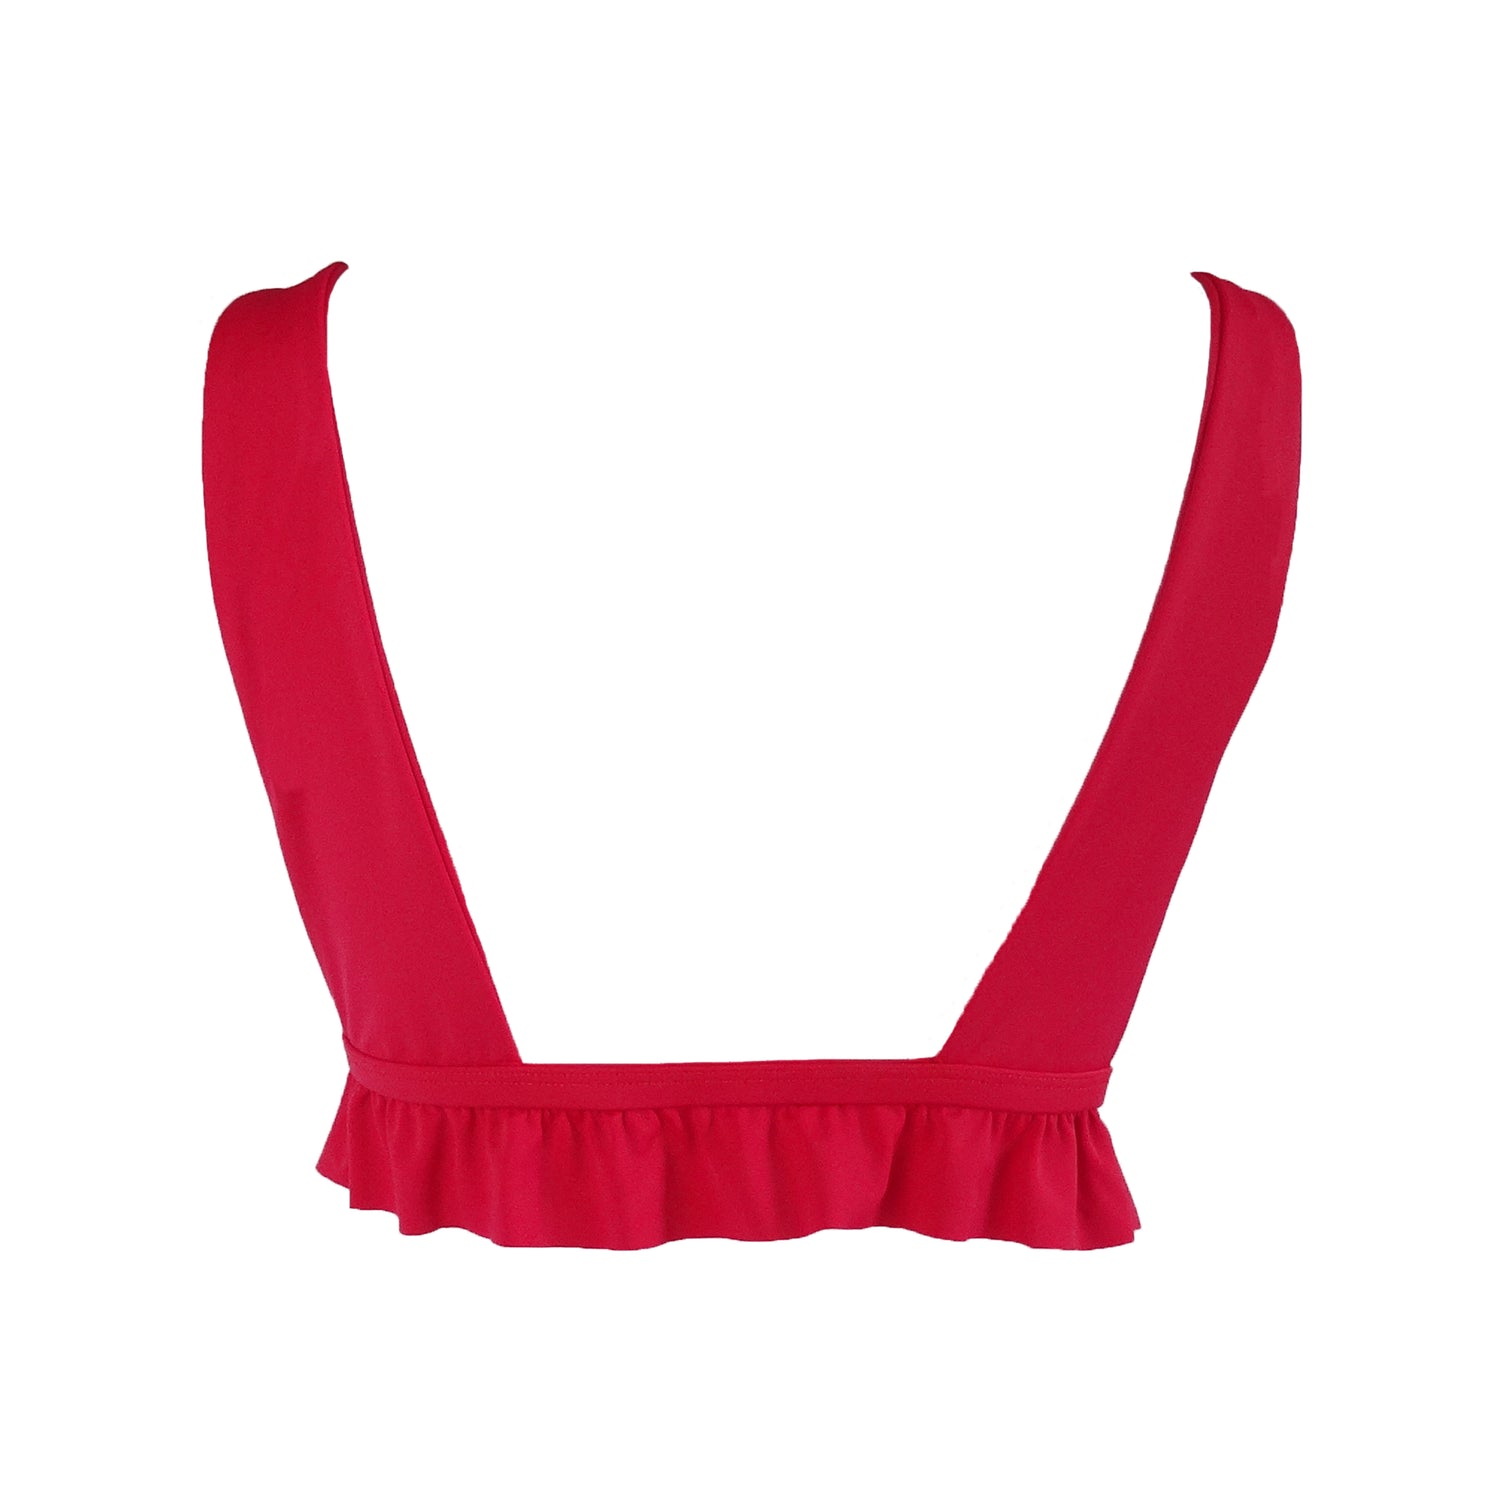 Back view of red bralette style Plunging V-neck bikini top with ruffle hem.